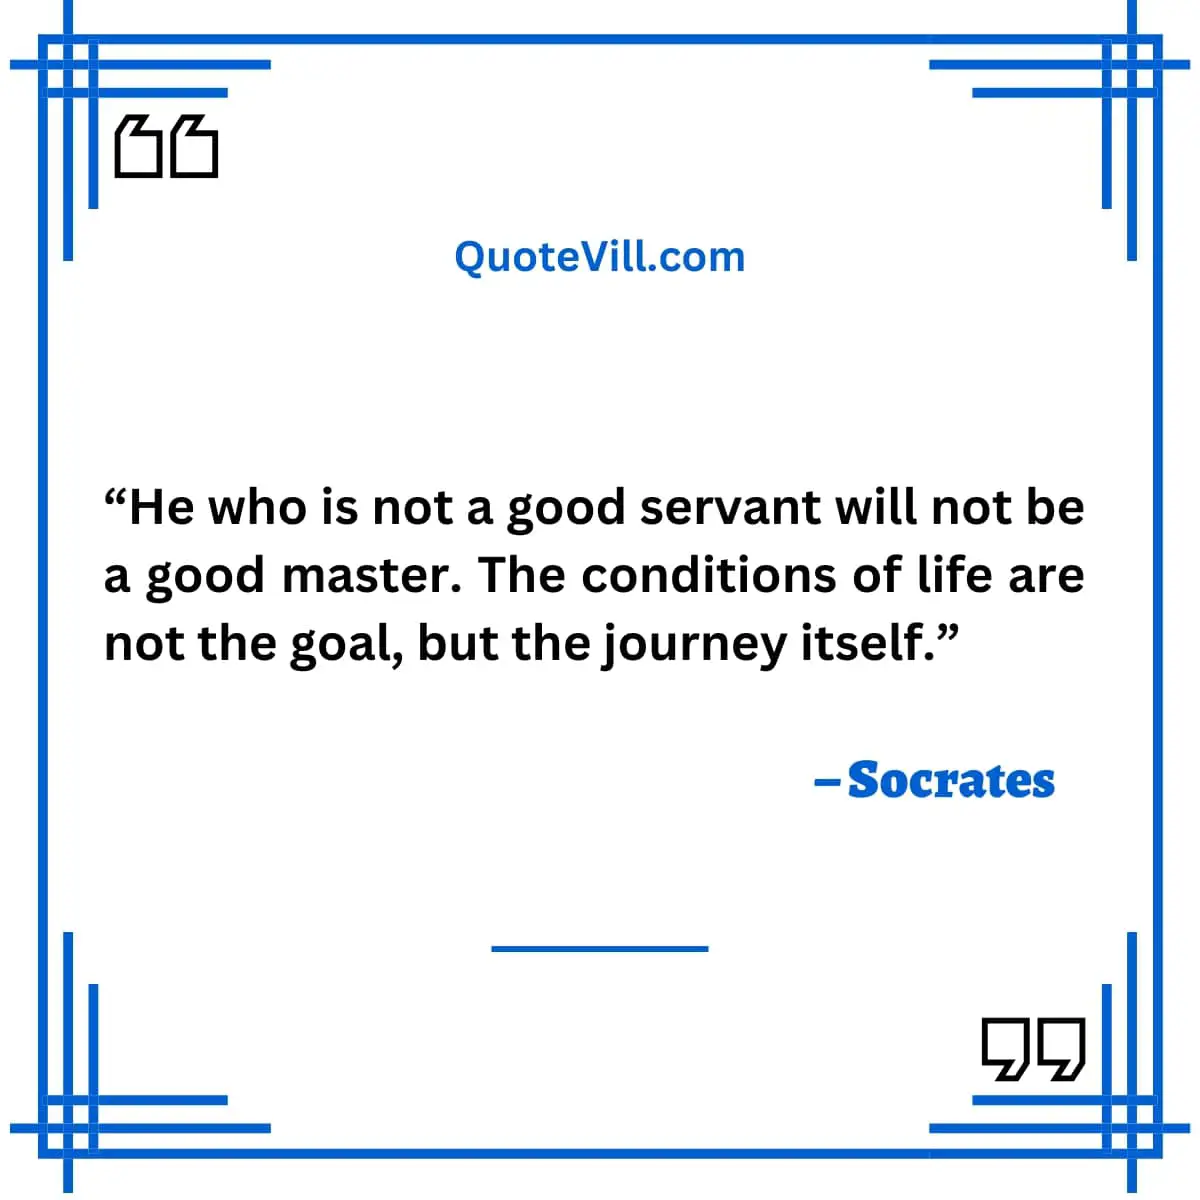 ocrates Quotes On Life and Happiness